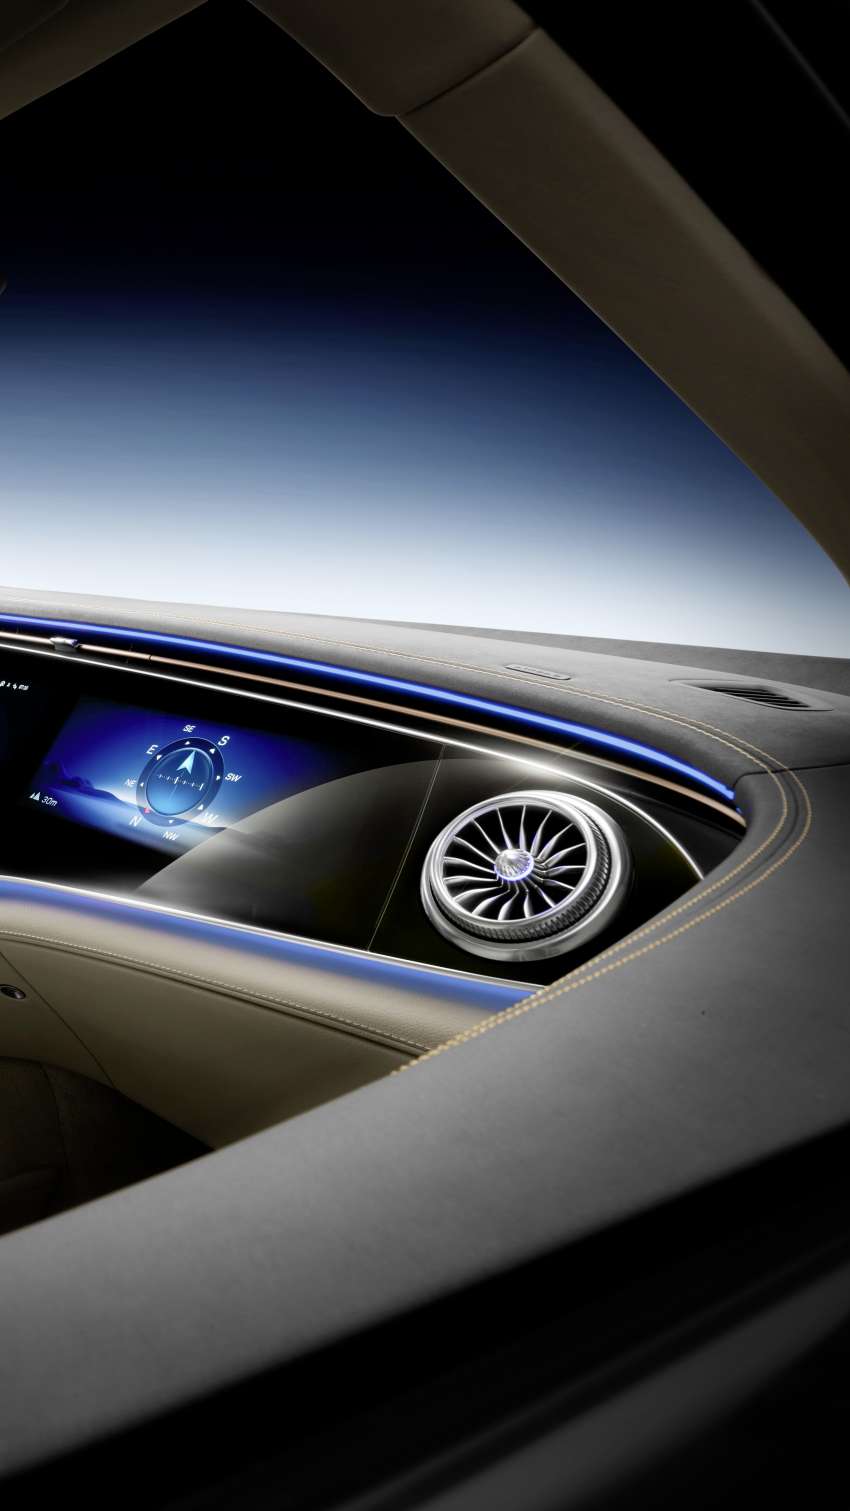 Mercedes-Benz EQS SUV interior shown – full reveal of seven-seater luxury electric crossover on April 19 1430708